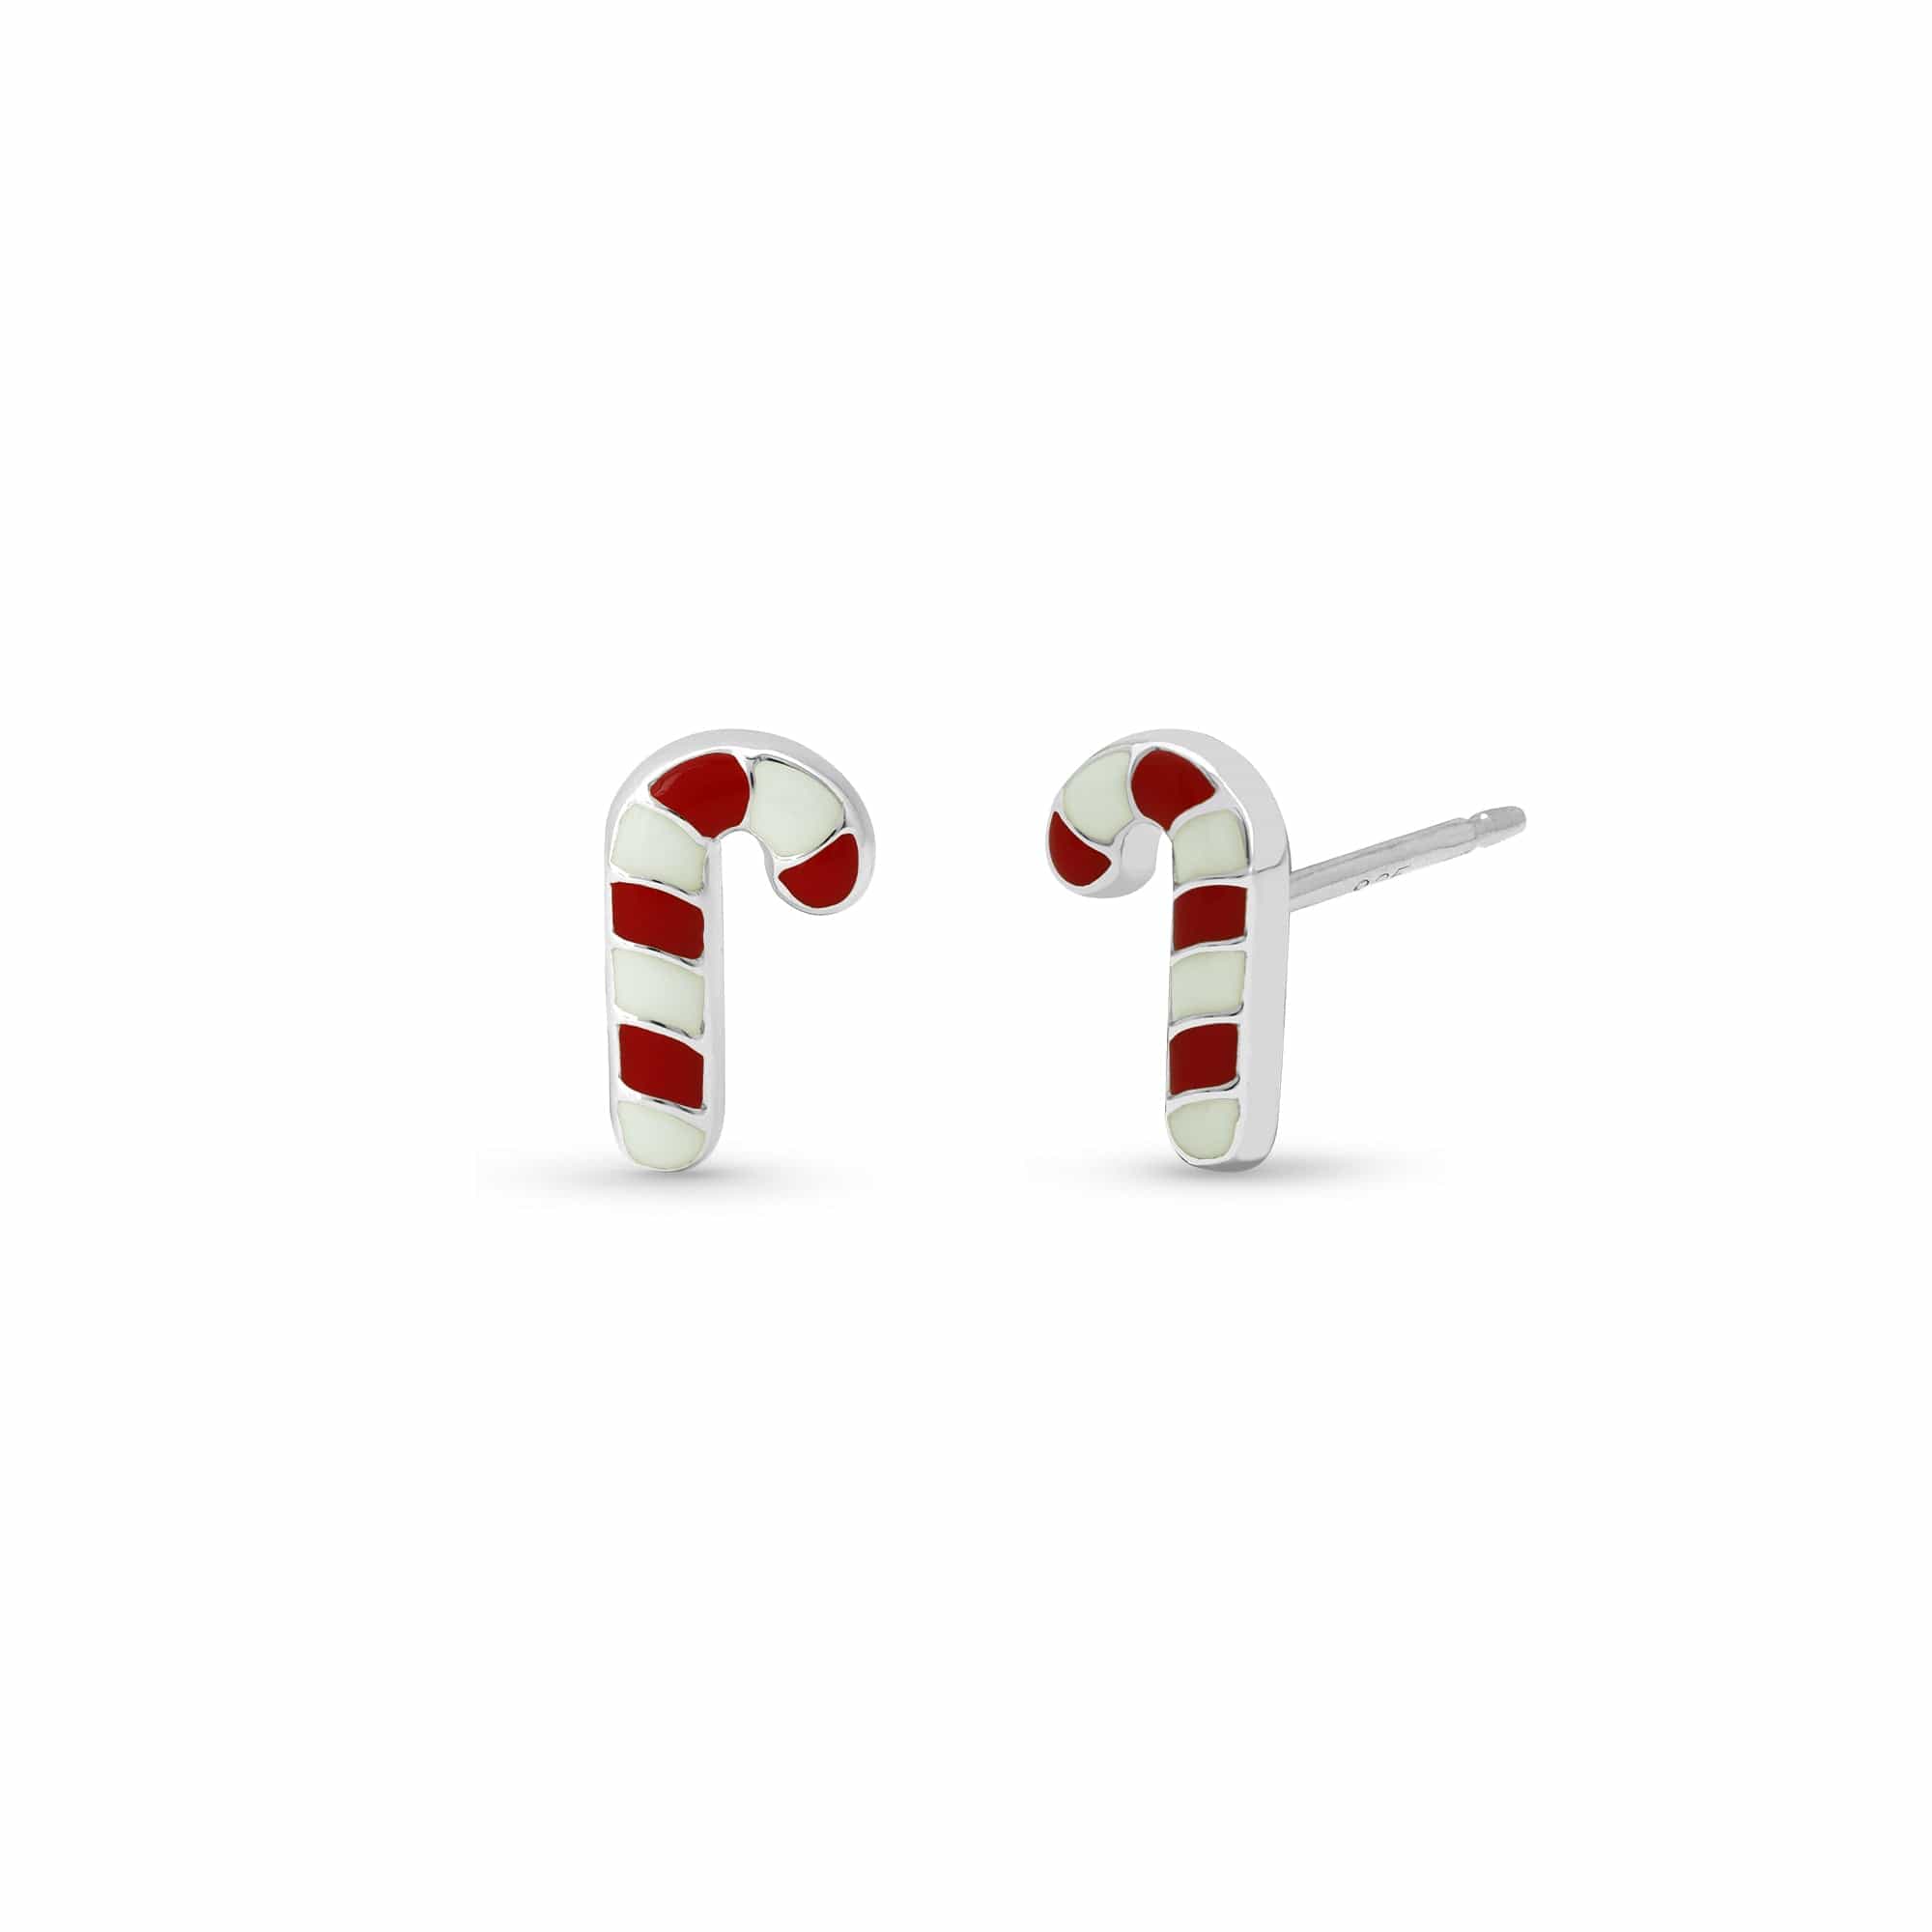 Boma Jewelry Earrings Candy Cane Studs